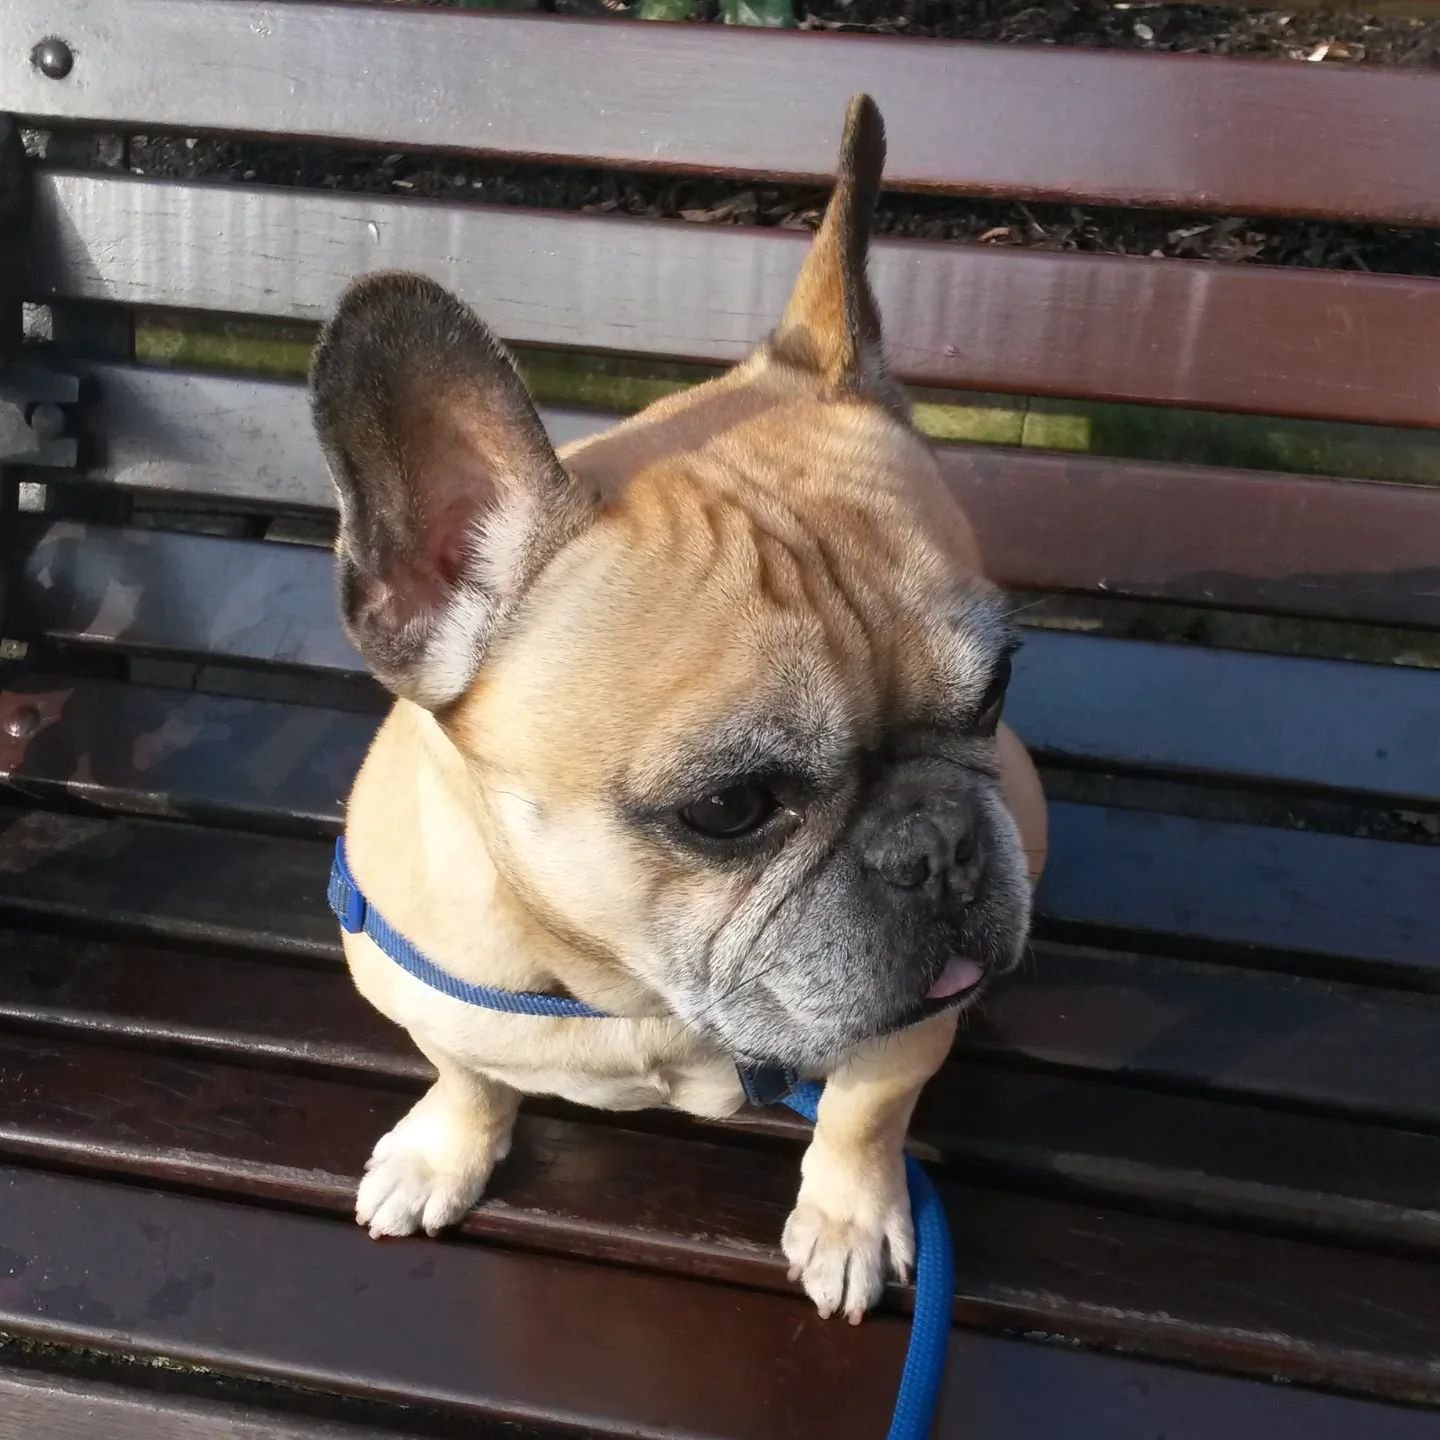 Just having a little pit stop &amp; watching the world go by. Miss this little guy 💙
.
.
.
.
.
#frenchie #frenchy #frenchbulldog #frenchbulldogsofig #bulldog #bulldogsofinstagram #bully #bullbreedsofinsta #bullbreed #solodogwalker #dogwalker #instad